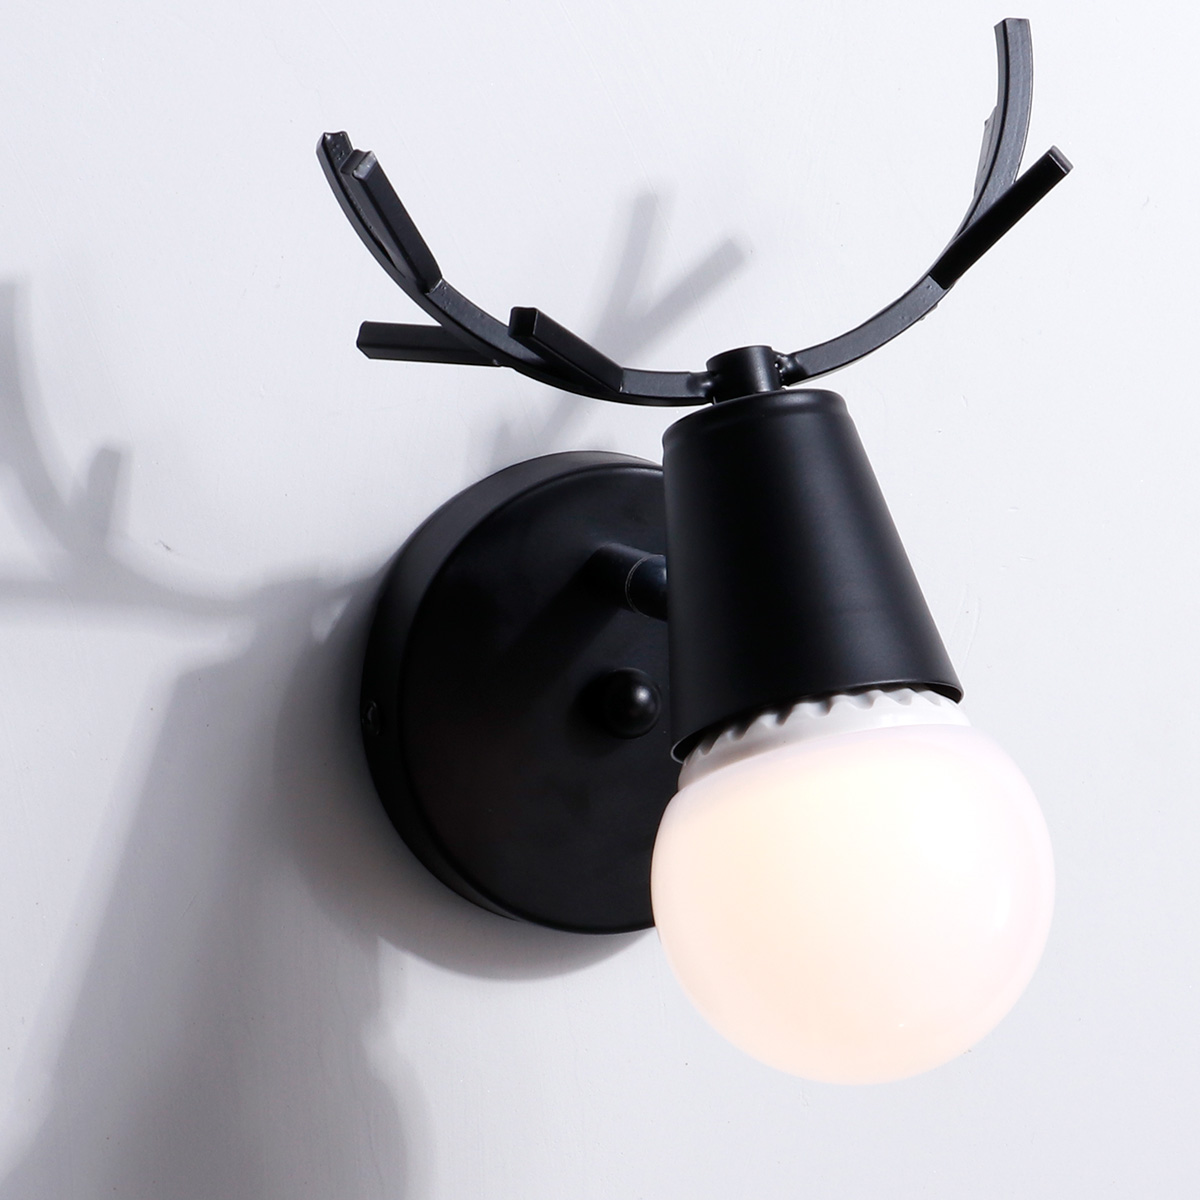 KAWELL Creative Wall Light Modern Wall Lamp Simple Wall Scone Iron E27 Base Deer Head Nordic Style Art Deco for Bedroom, Living Room, Children's Room, Restaurant, Hallway, Stairs, Black